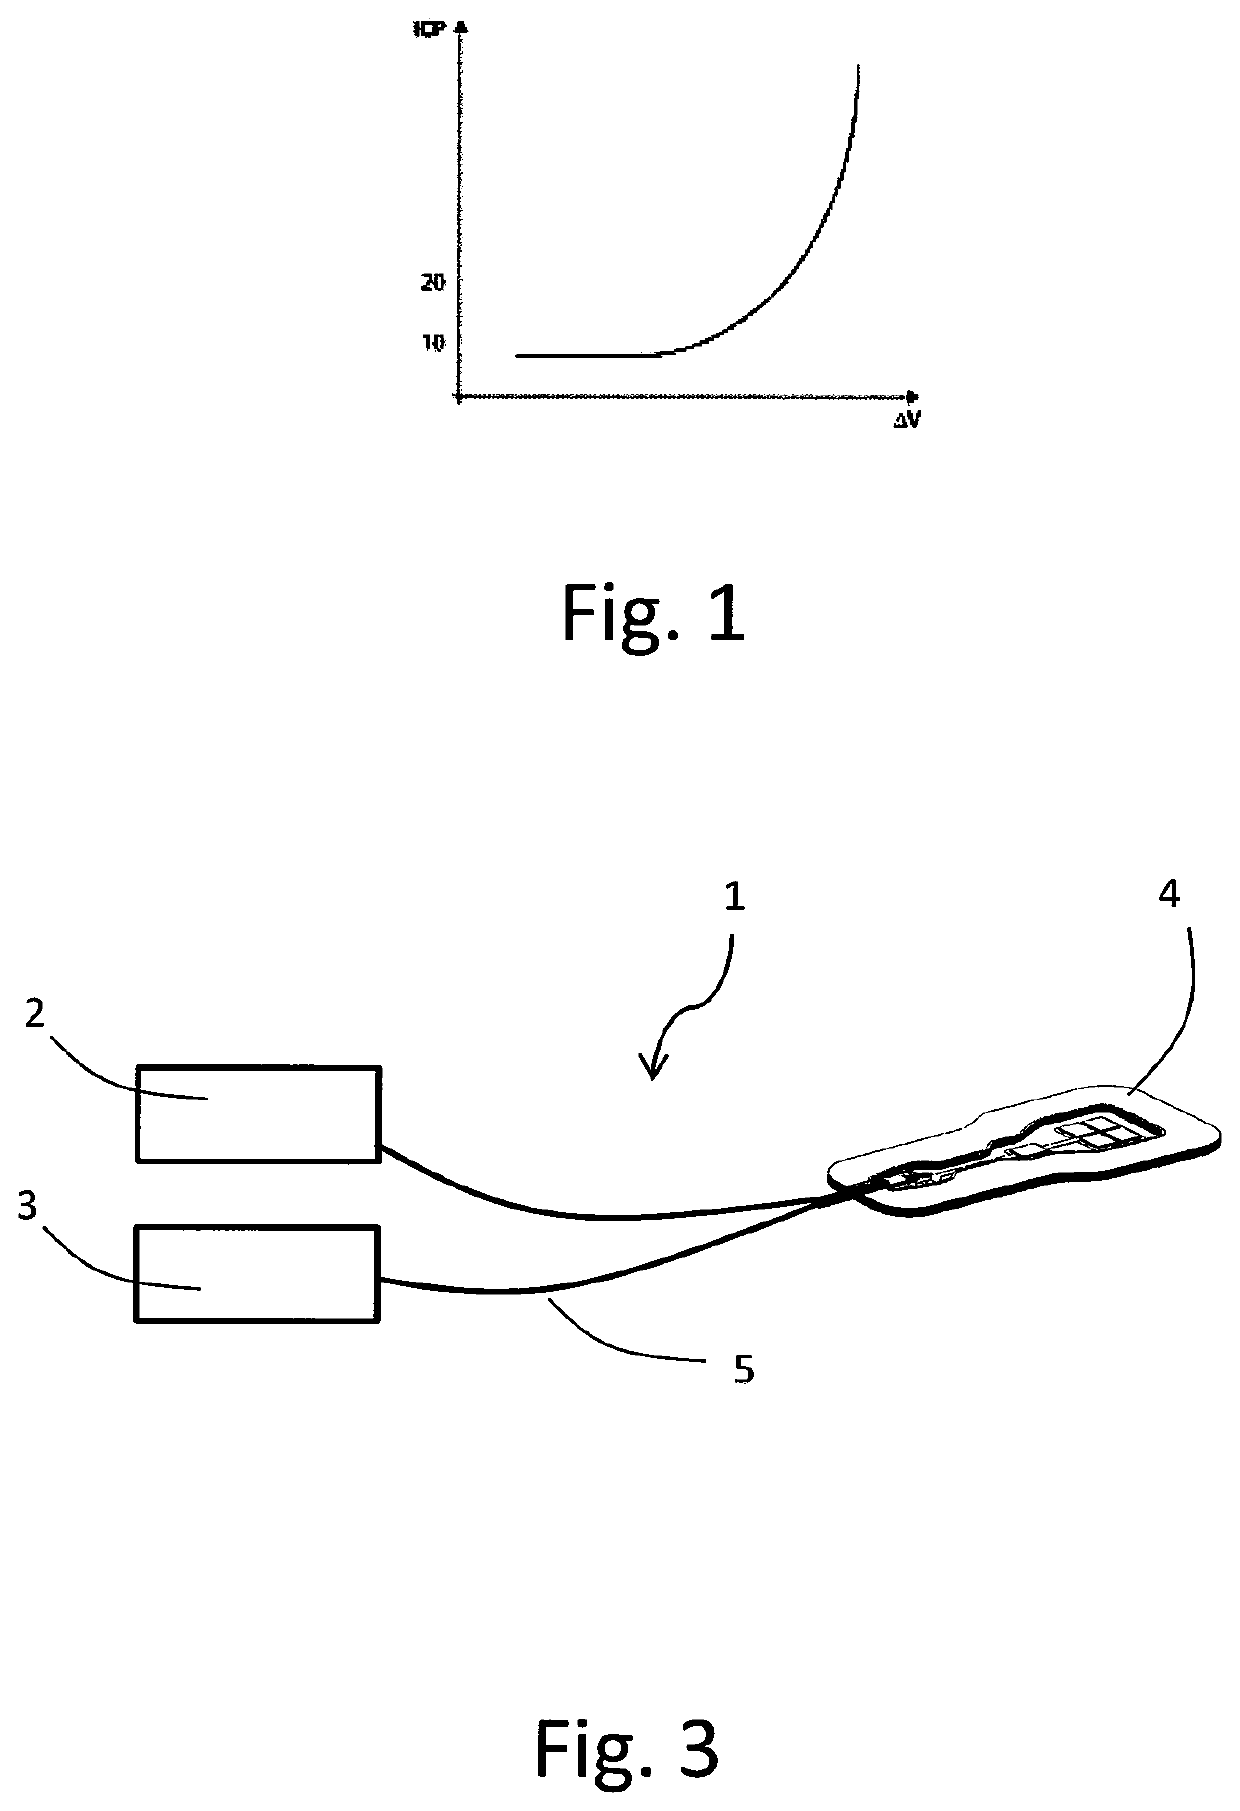 Measurement system and method for measuring parameters in a body tissue